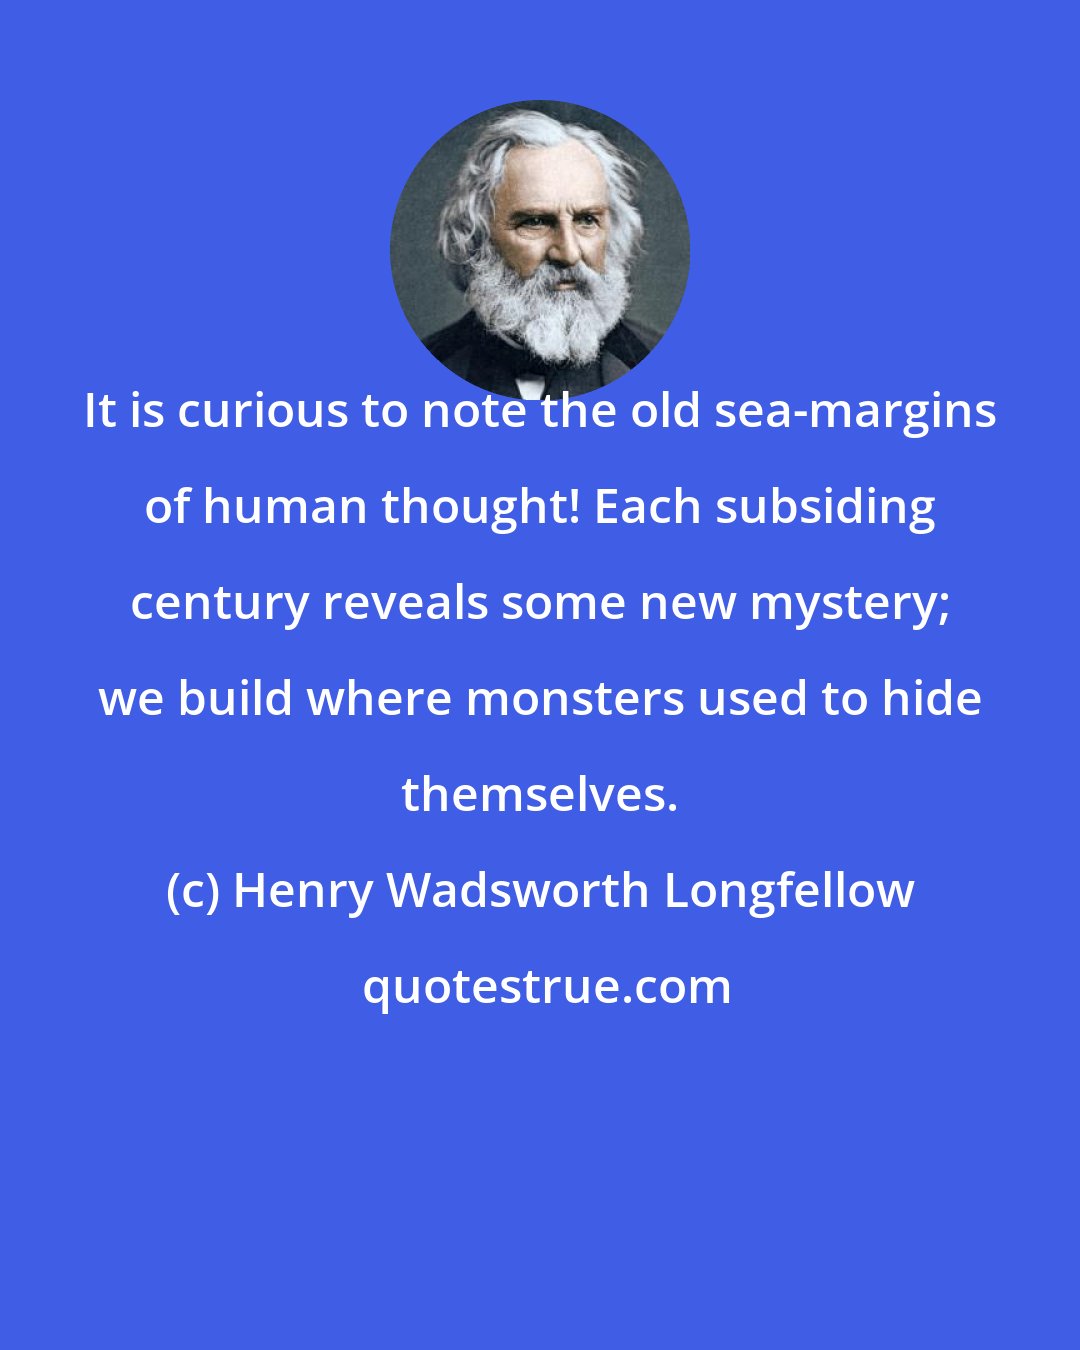 Henry Wadsworth Longfellow: It is curious to note the old sea-margins of human thought! Each subsiding century reveals some new mystery; we build where monsters used to hide themselves.